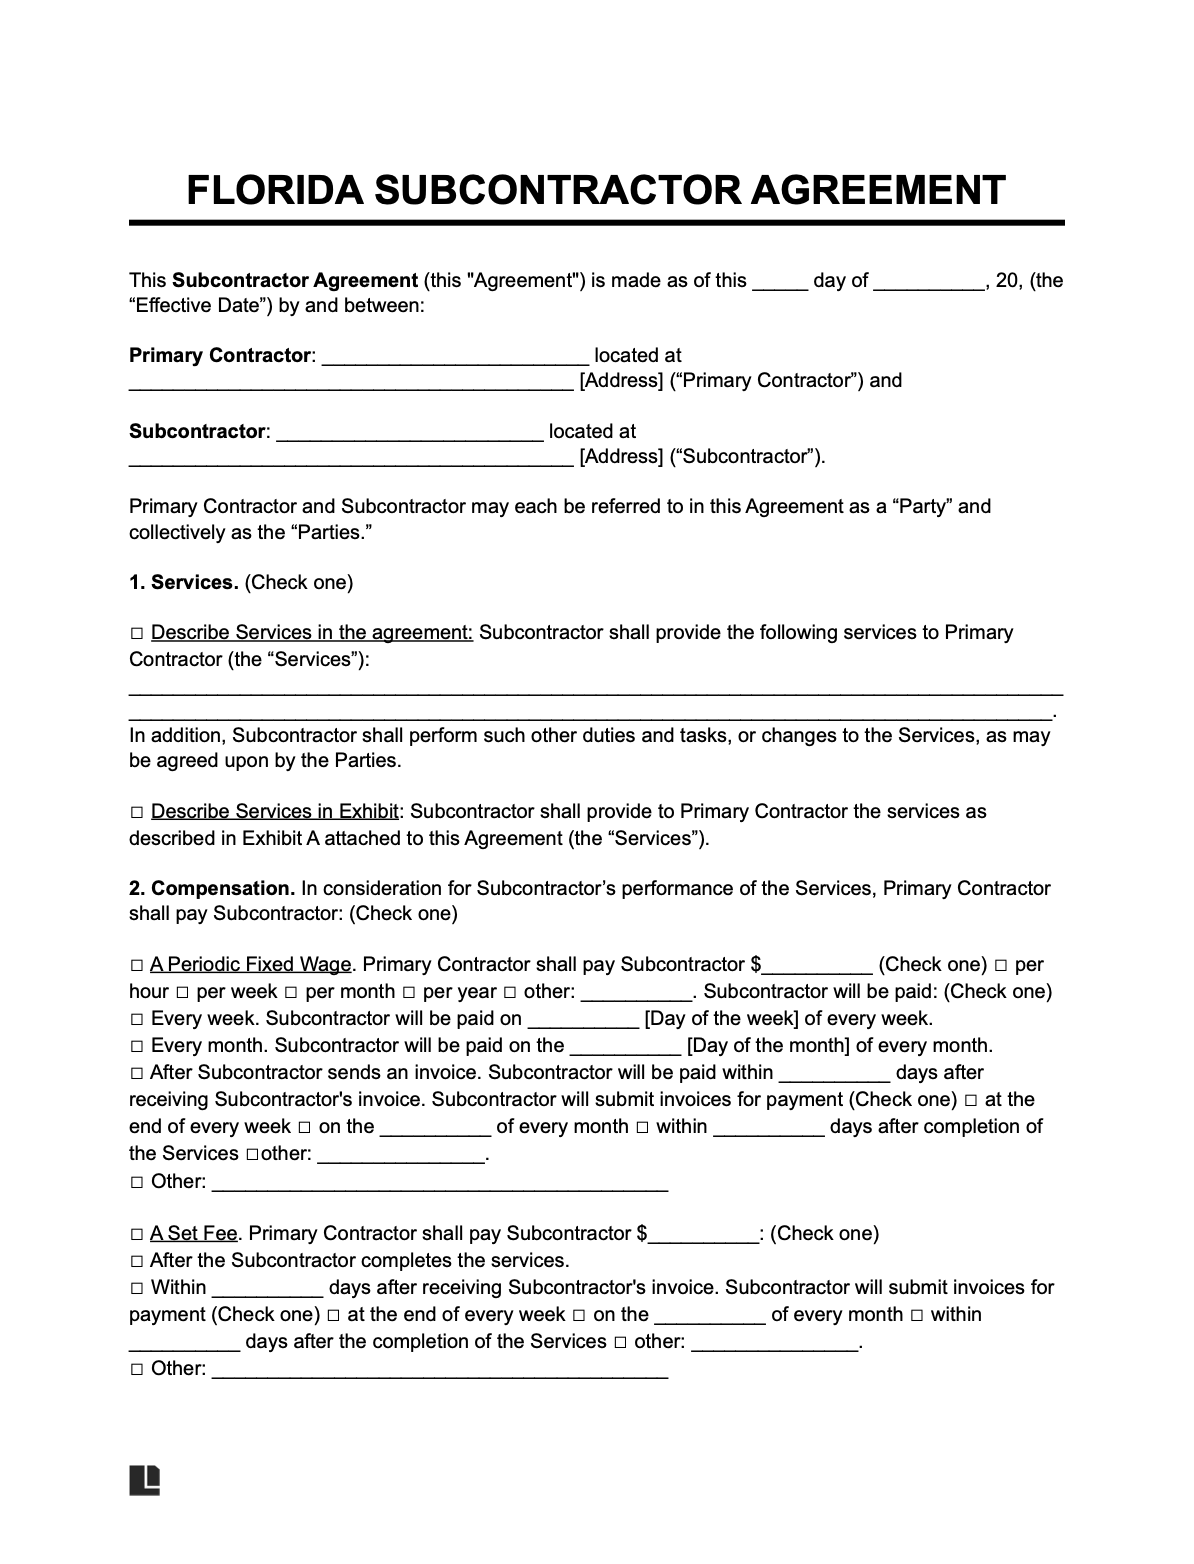 florida subcontractor agreement template